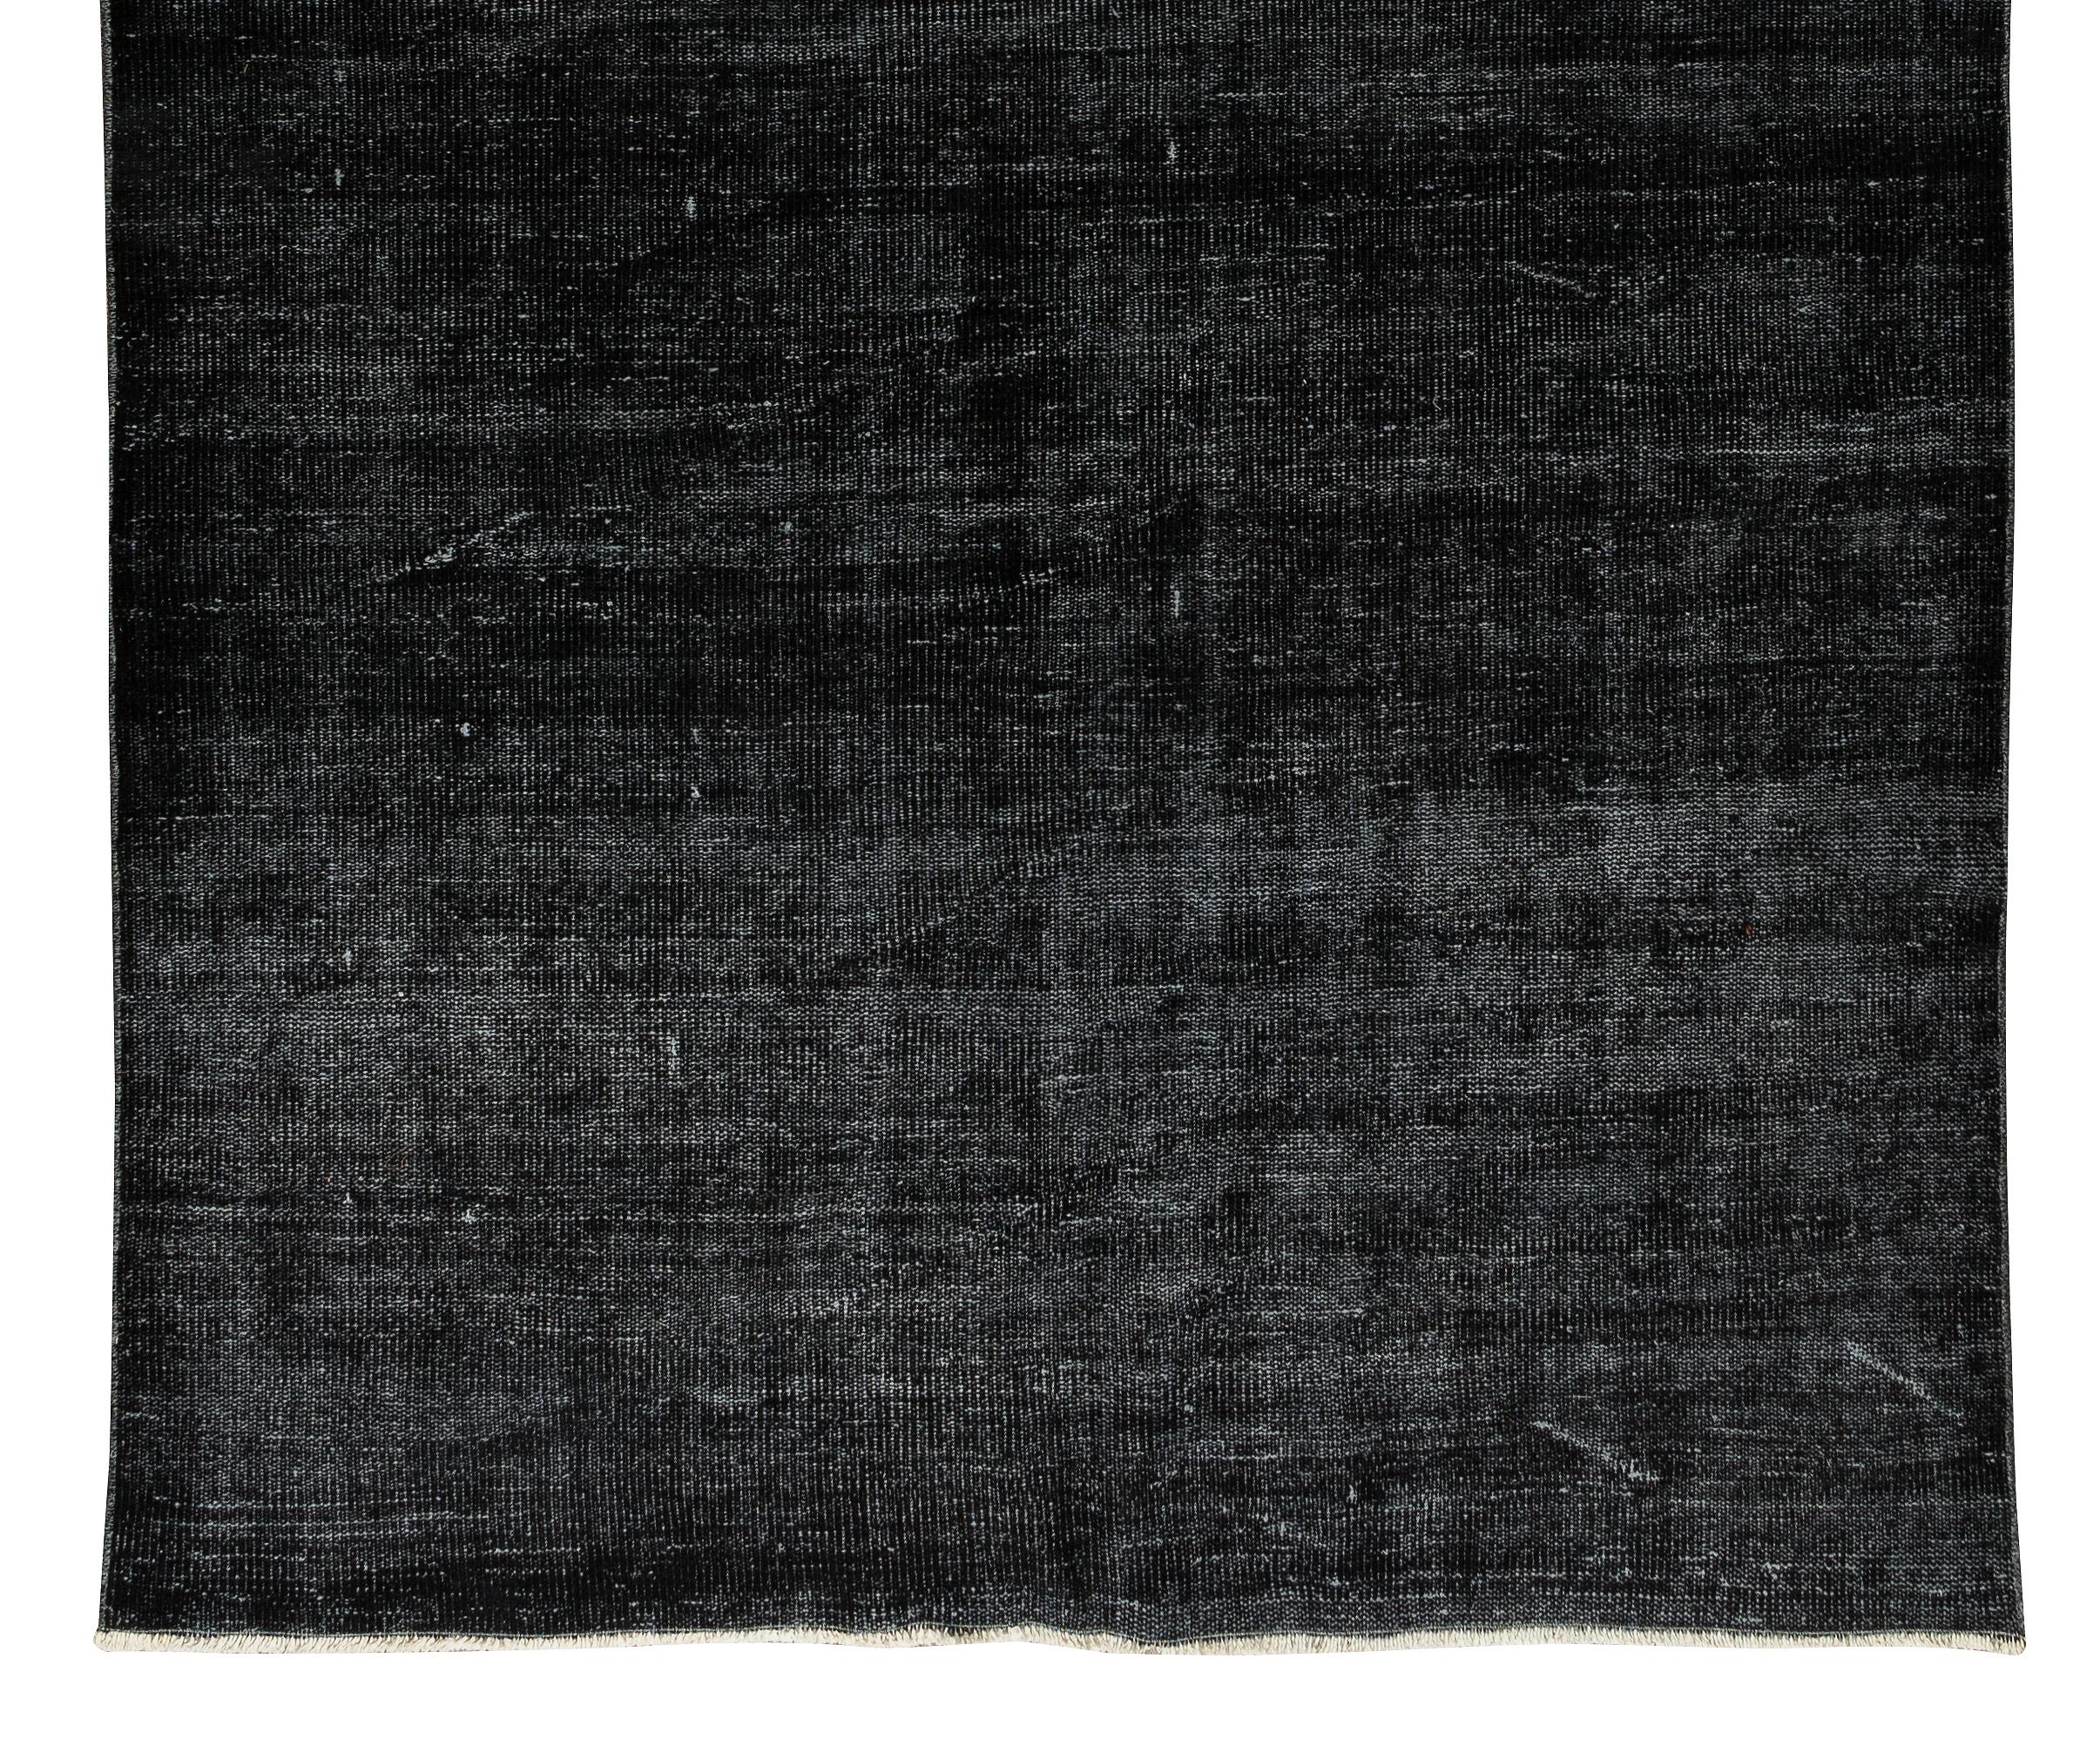 5.5x9.2 Ft Solid Black Area Rug made of wool and cotton, Hand-Knotted in Turkey In Good Condition For Sale In Philadelphia, PA